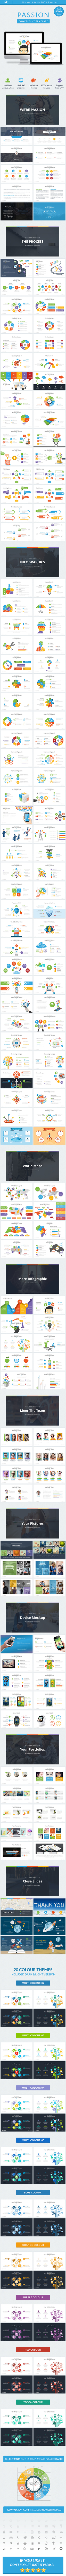 Passion - Business Powerpoint Template